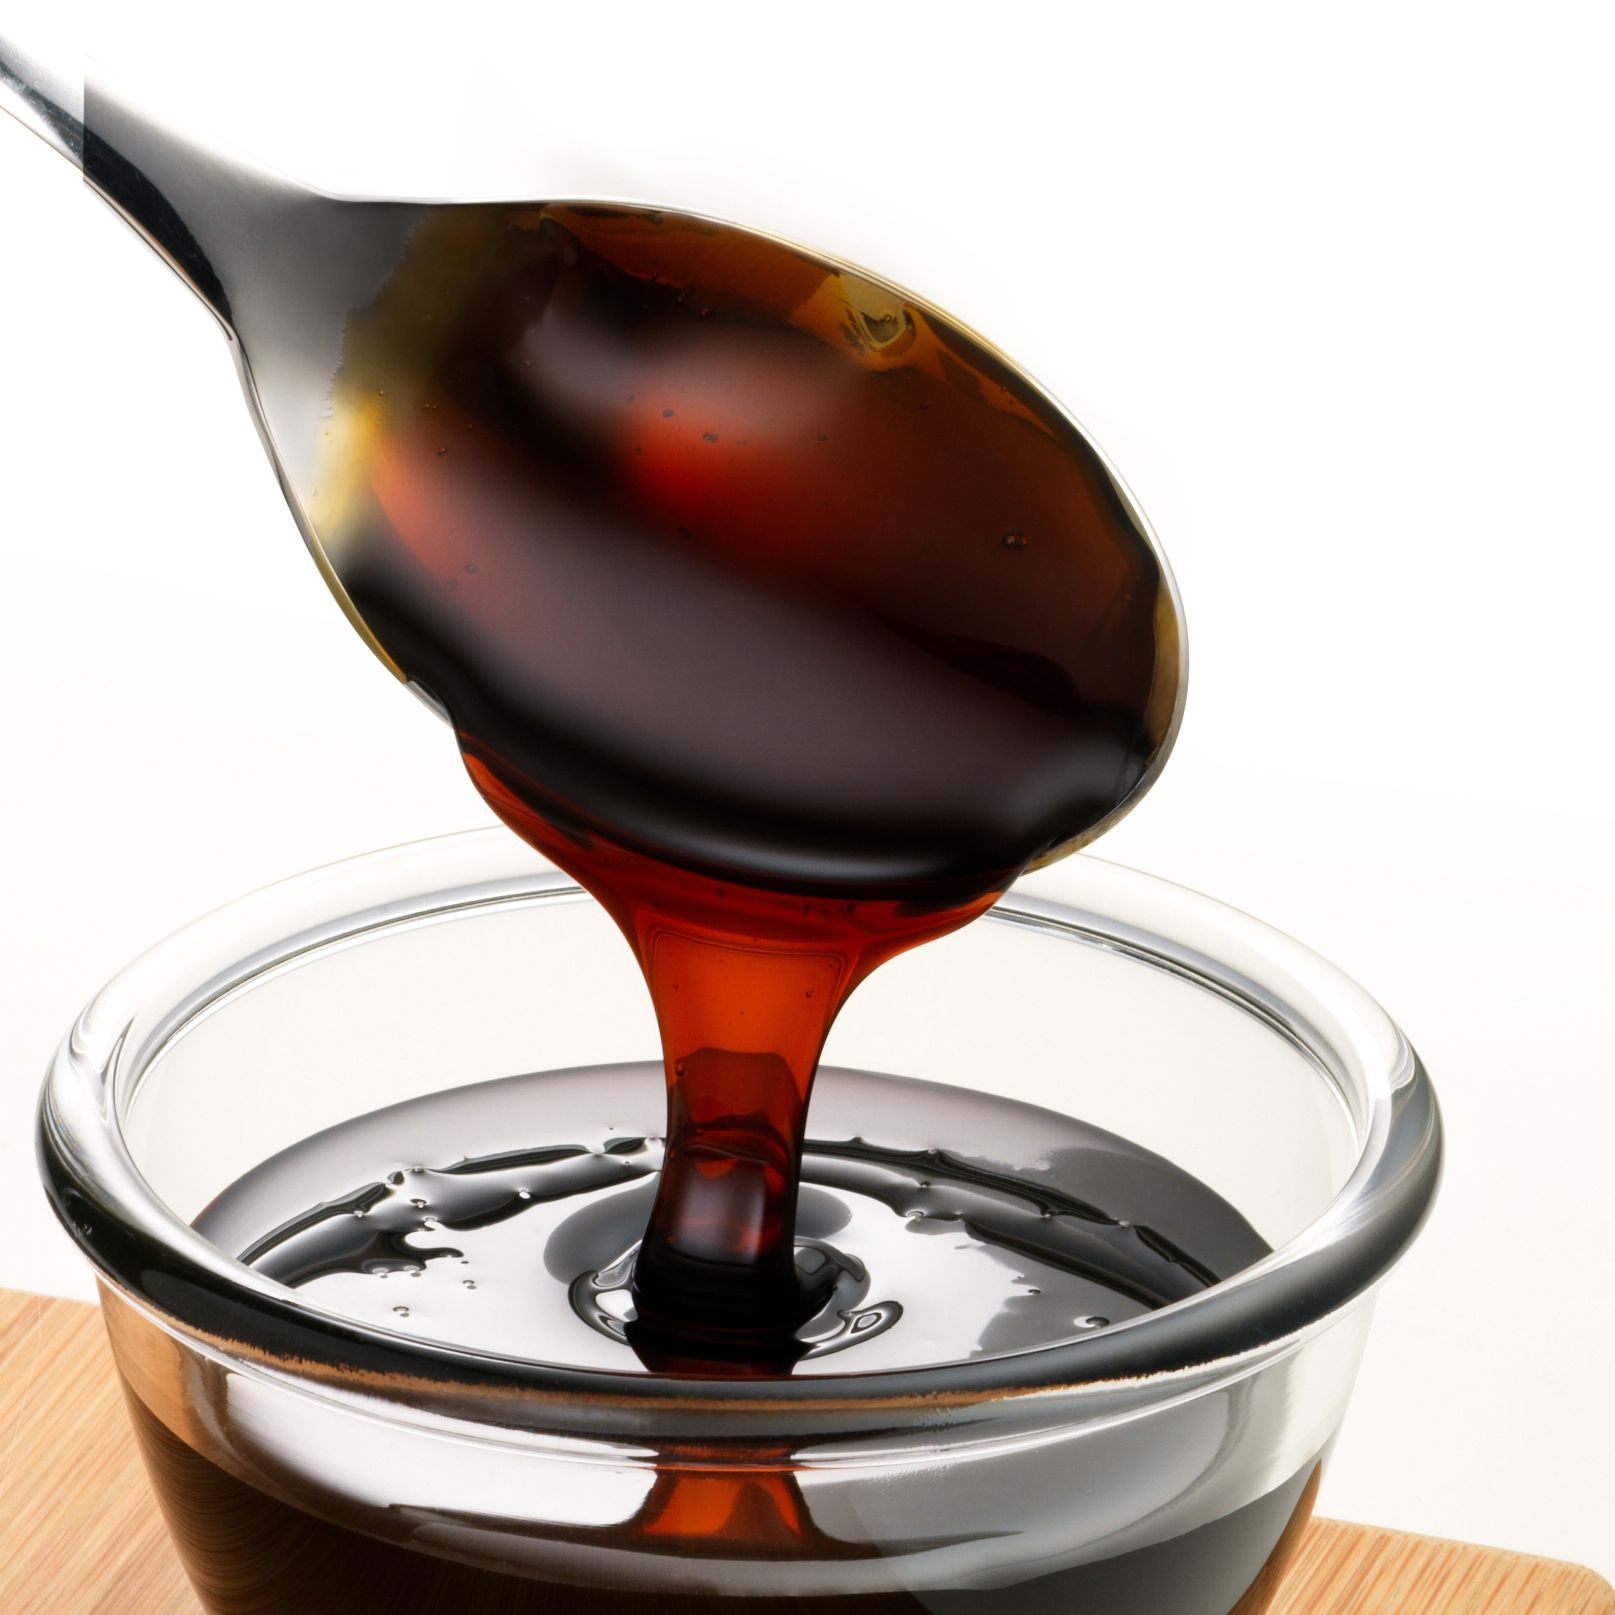 The benefits of molasses .. For the heart, arteries and intestines